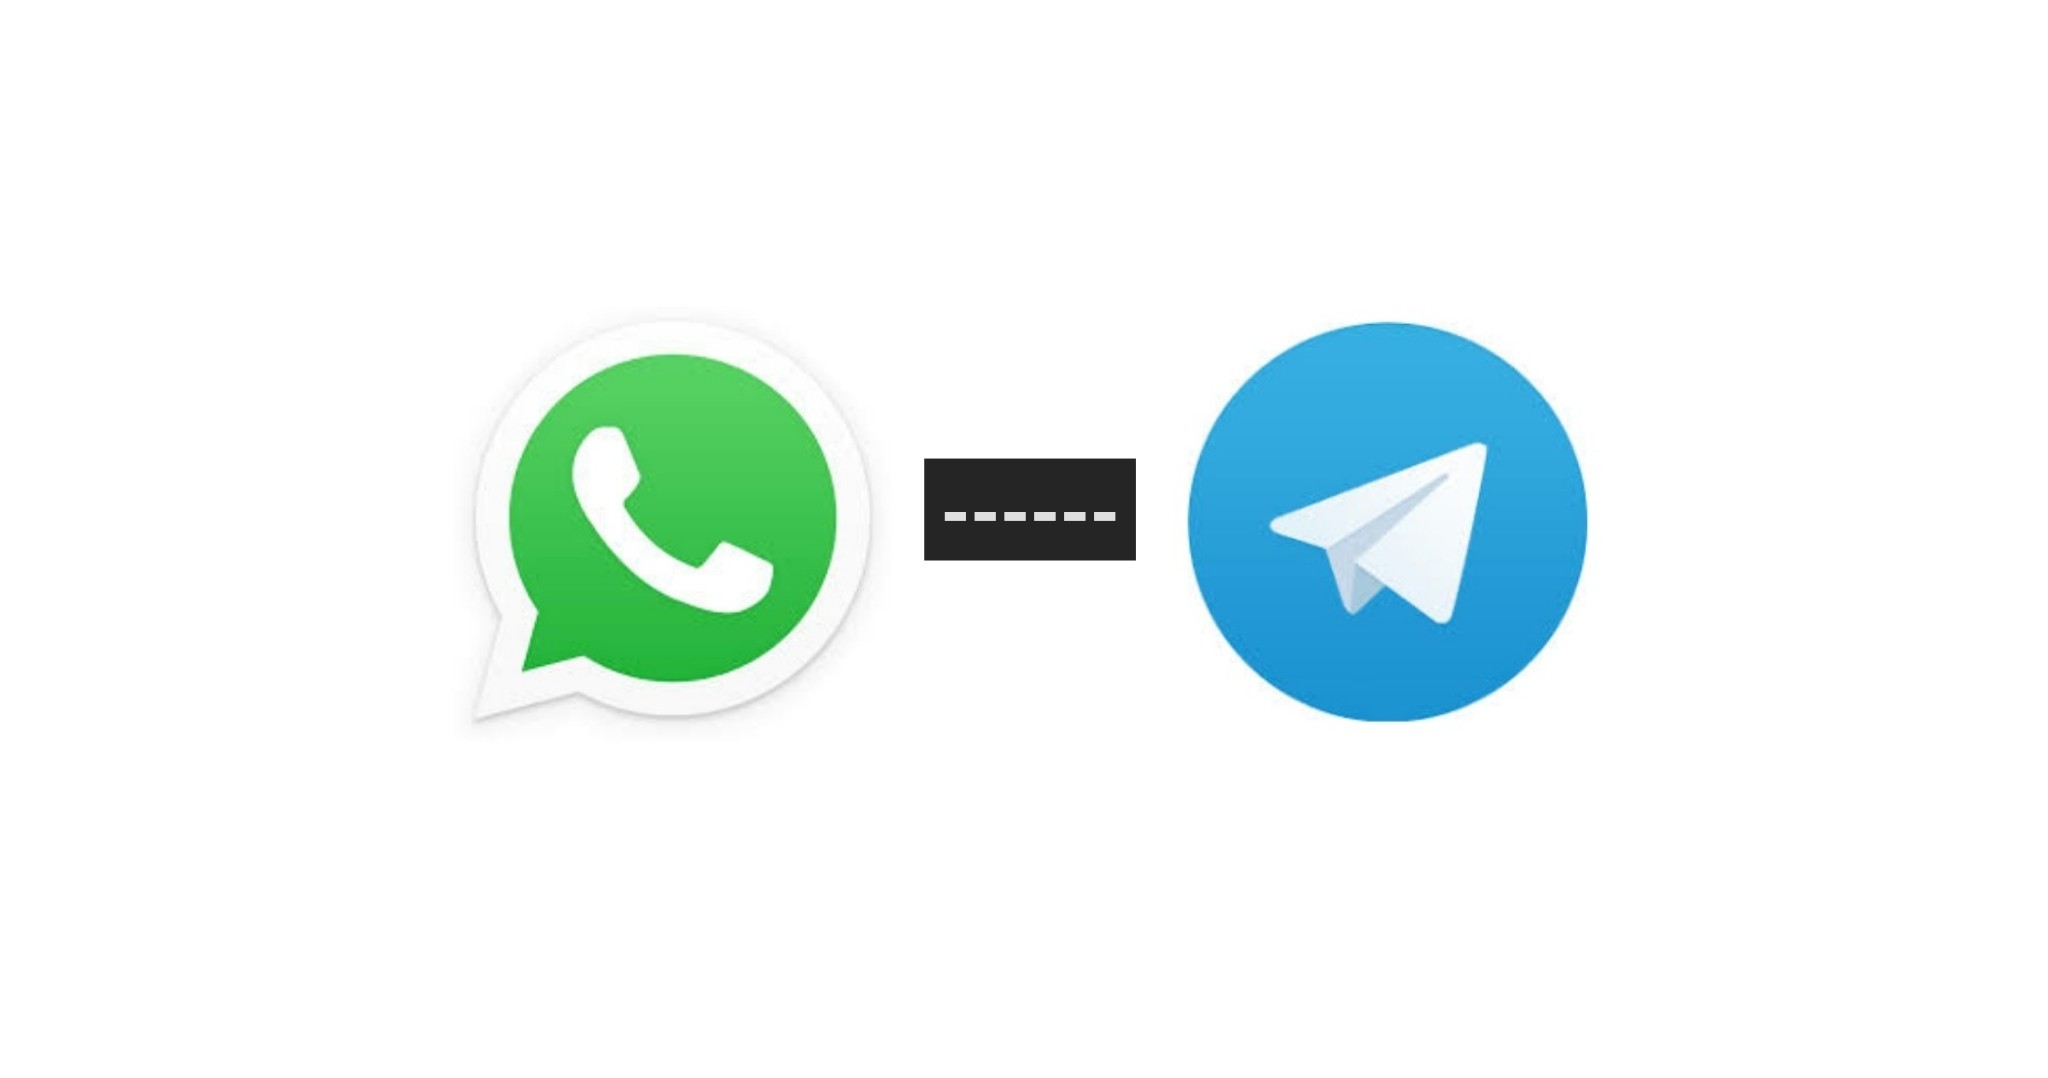 How to import whatsapp chat